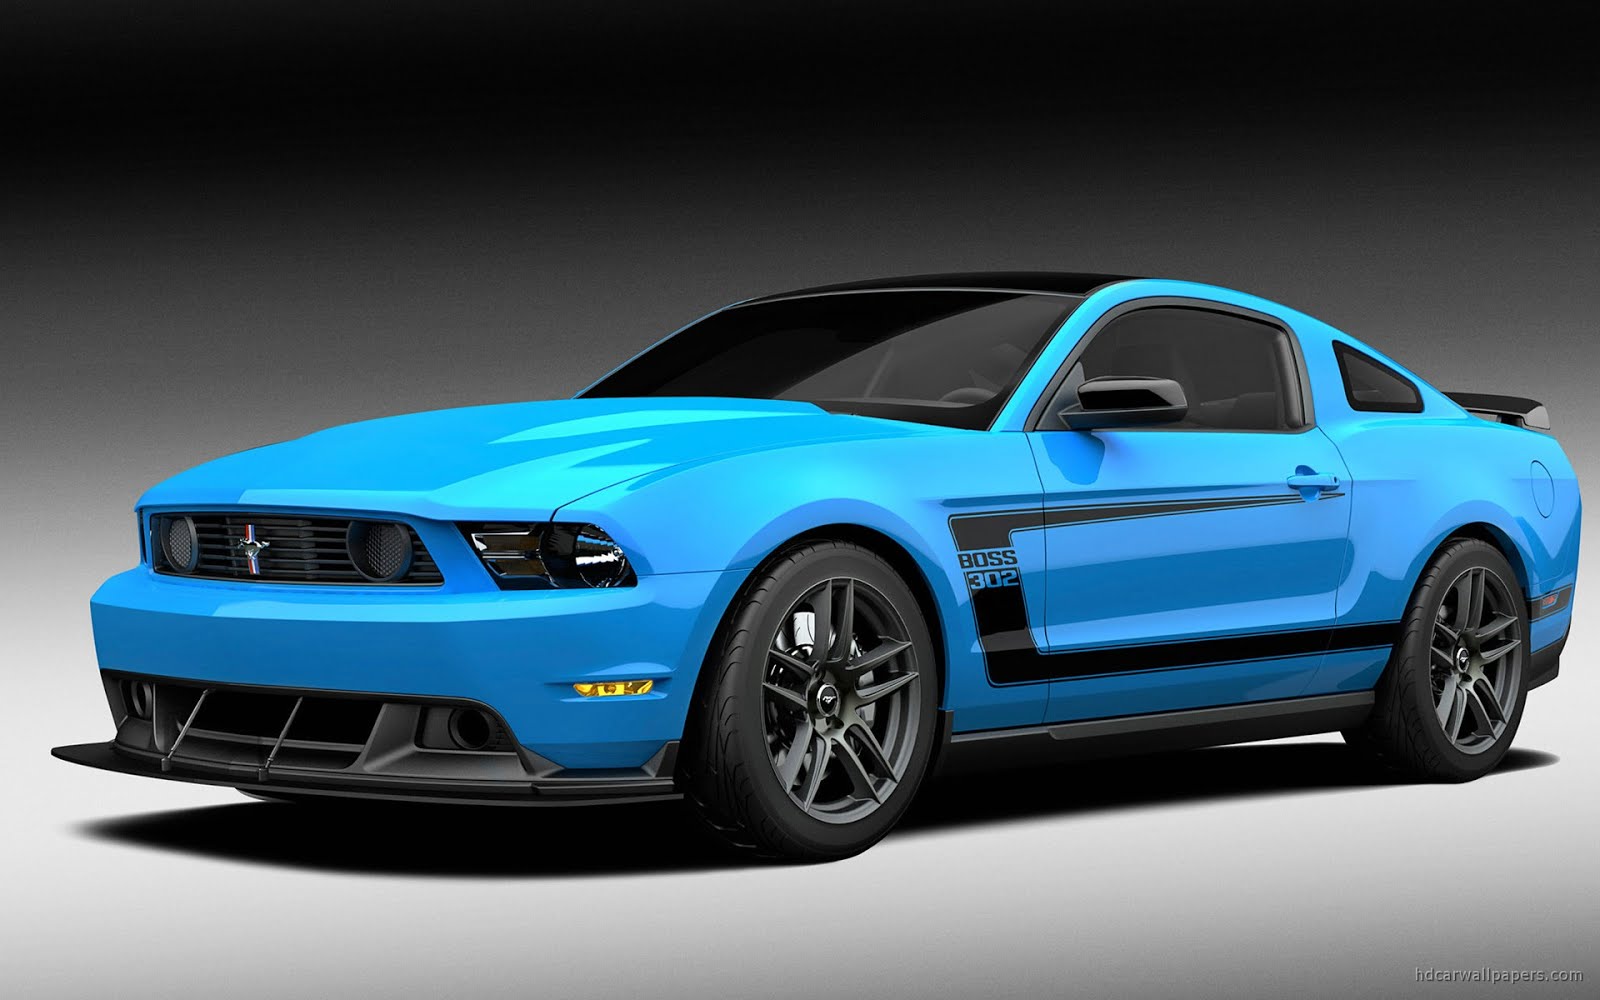 Awesome Cars Wallpaper Ford awesome car wallpapers 1600x1000